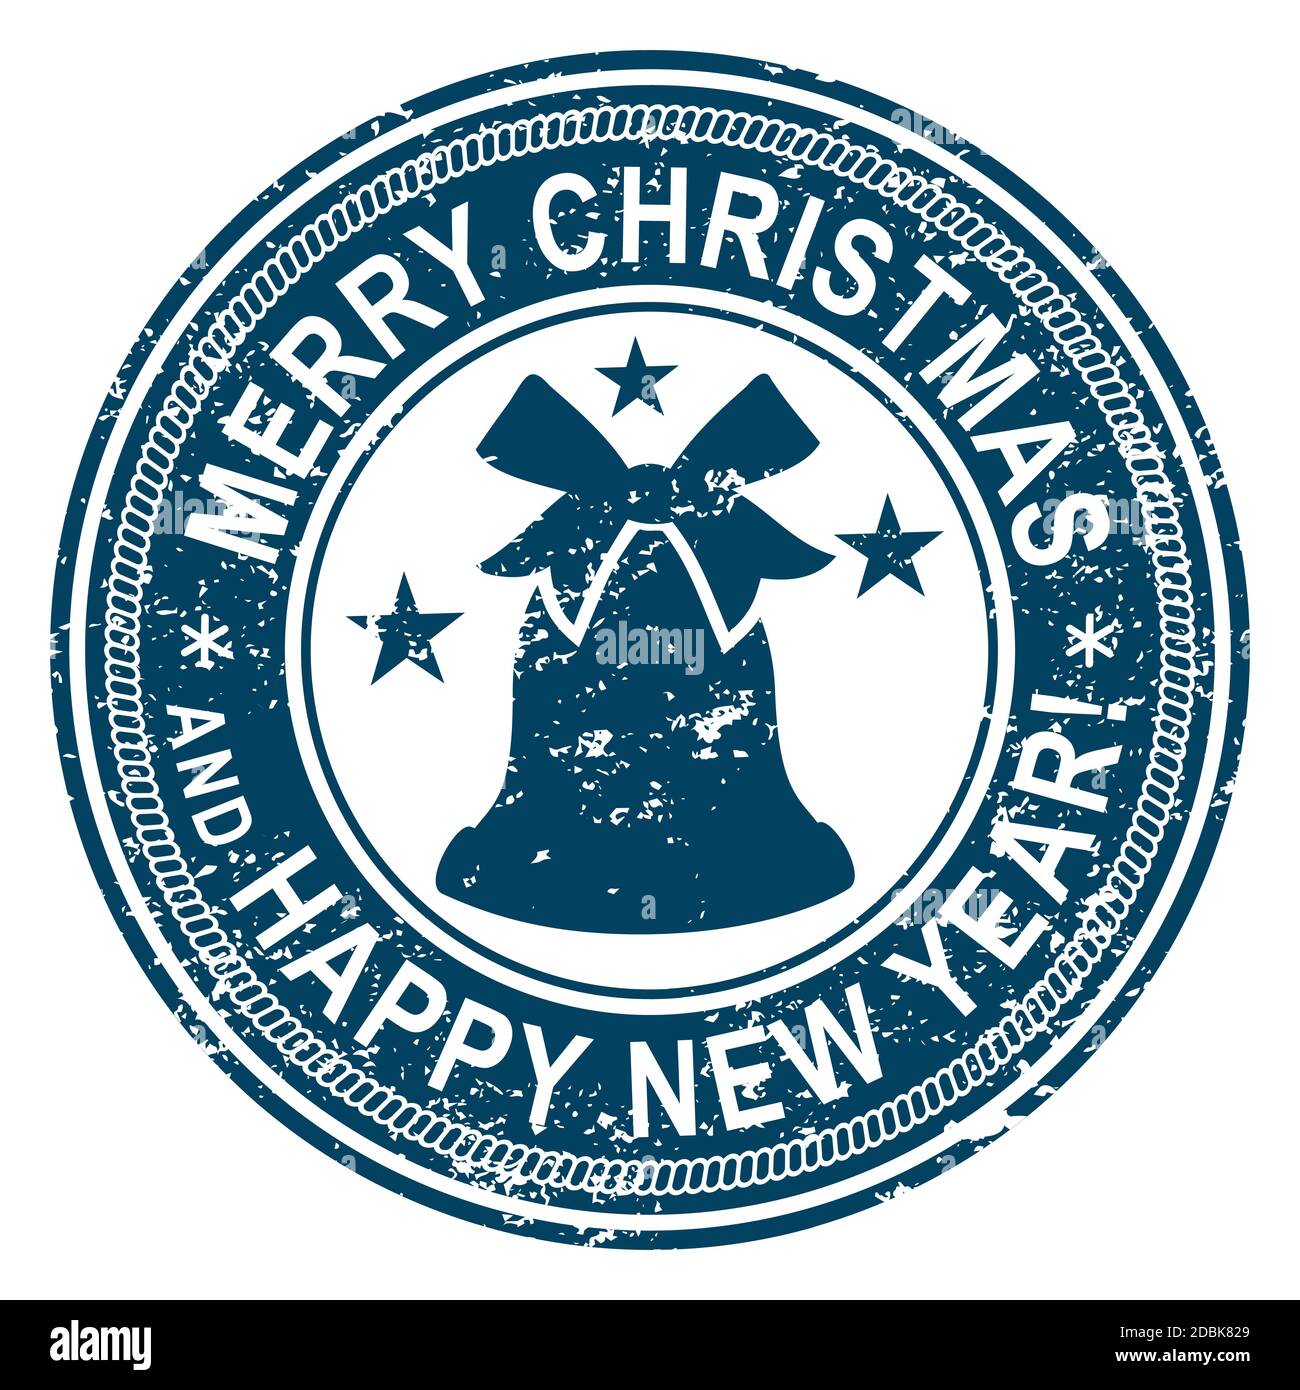 Christmas Stamp on white background. Grunge surface. Christmas bell in center cricle. Merry Christmas and Happy New Year inscription Stock Vector